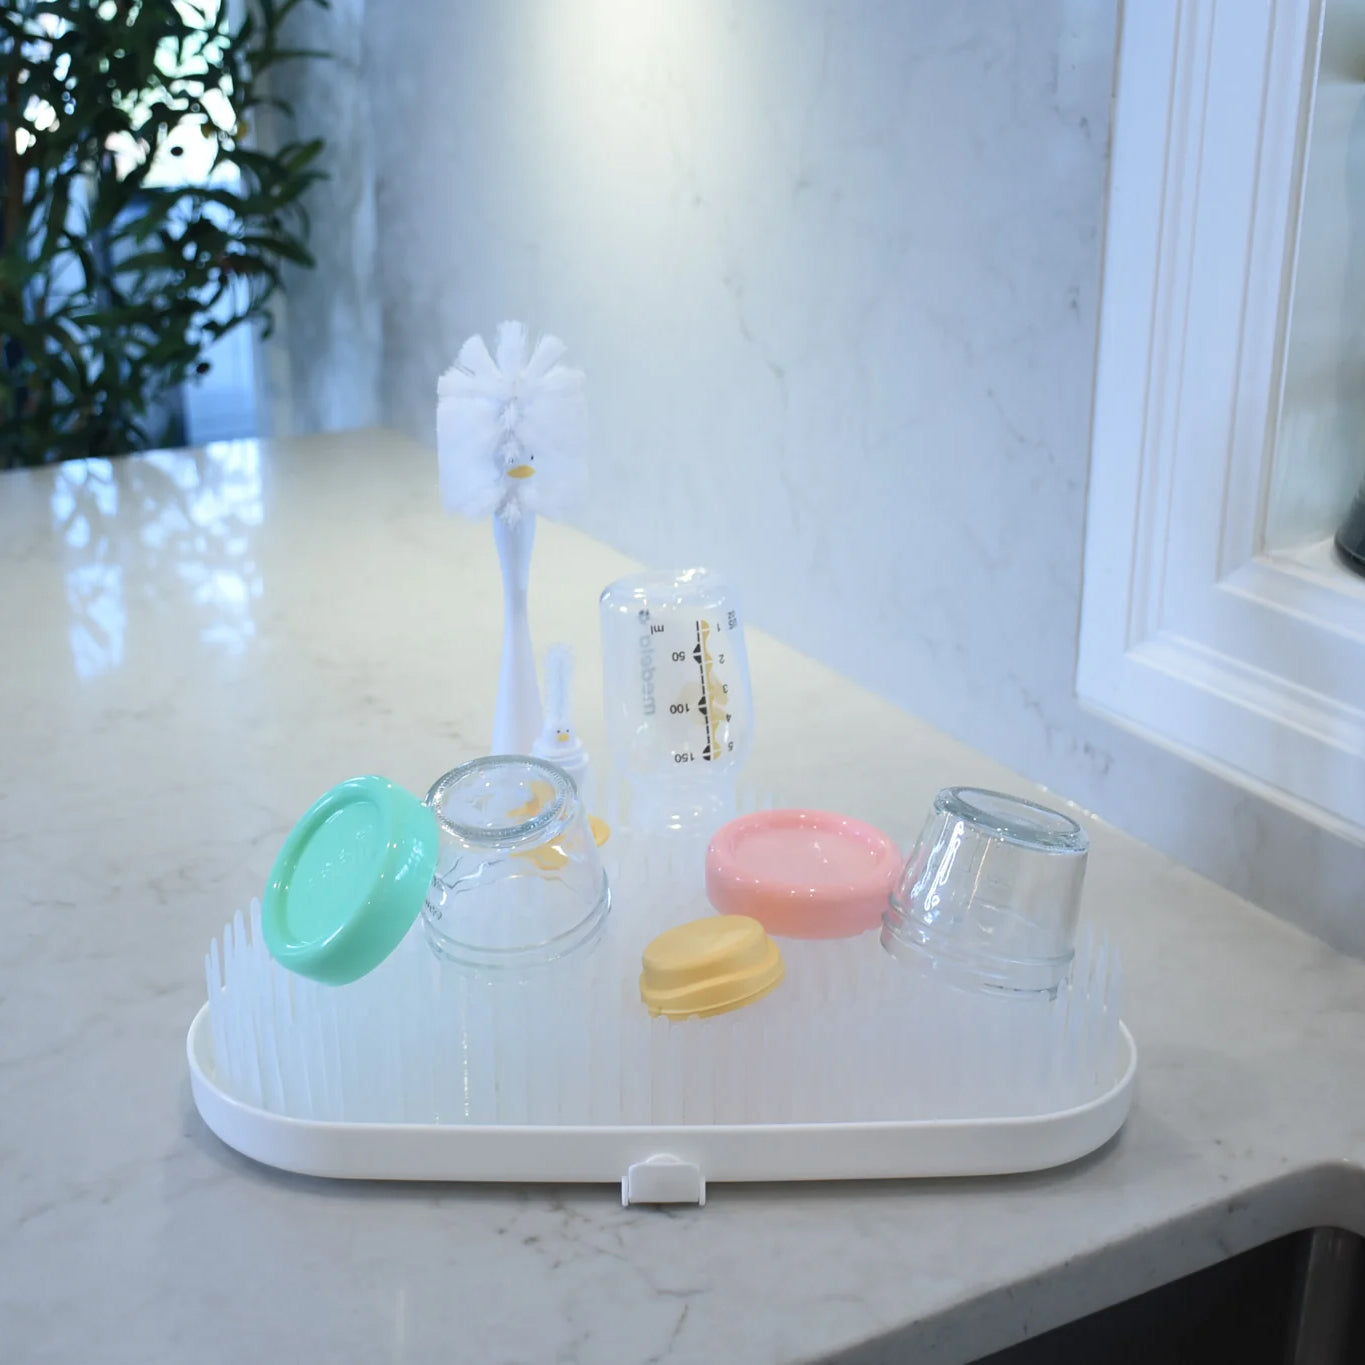 Melii White Cloud Drying Rack - BPA-Free, Low-Profile Design for Efficient Baby Feeding Essentials Drying, Easy to Clean, Top-Rack Dishwasher-Safe